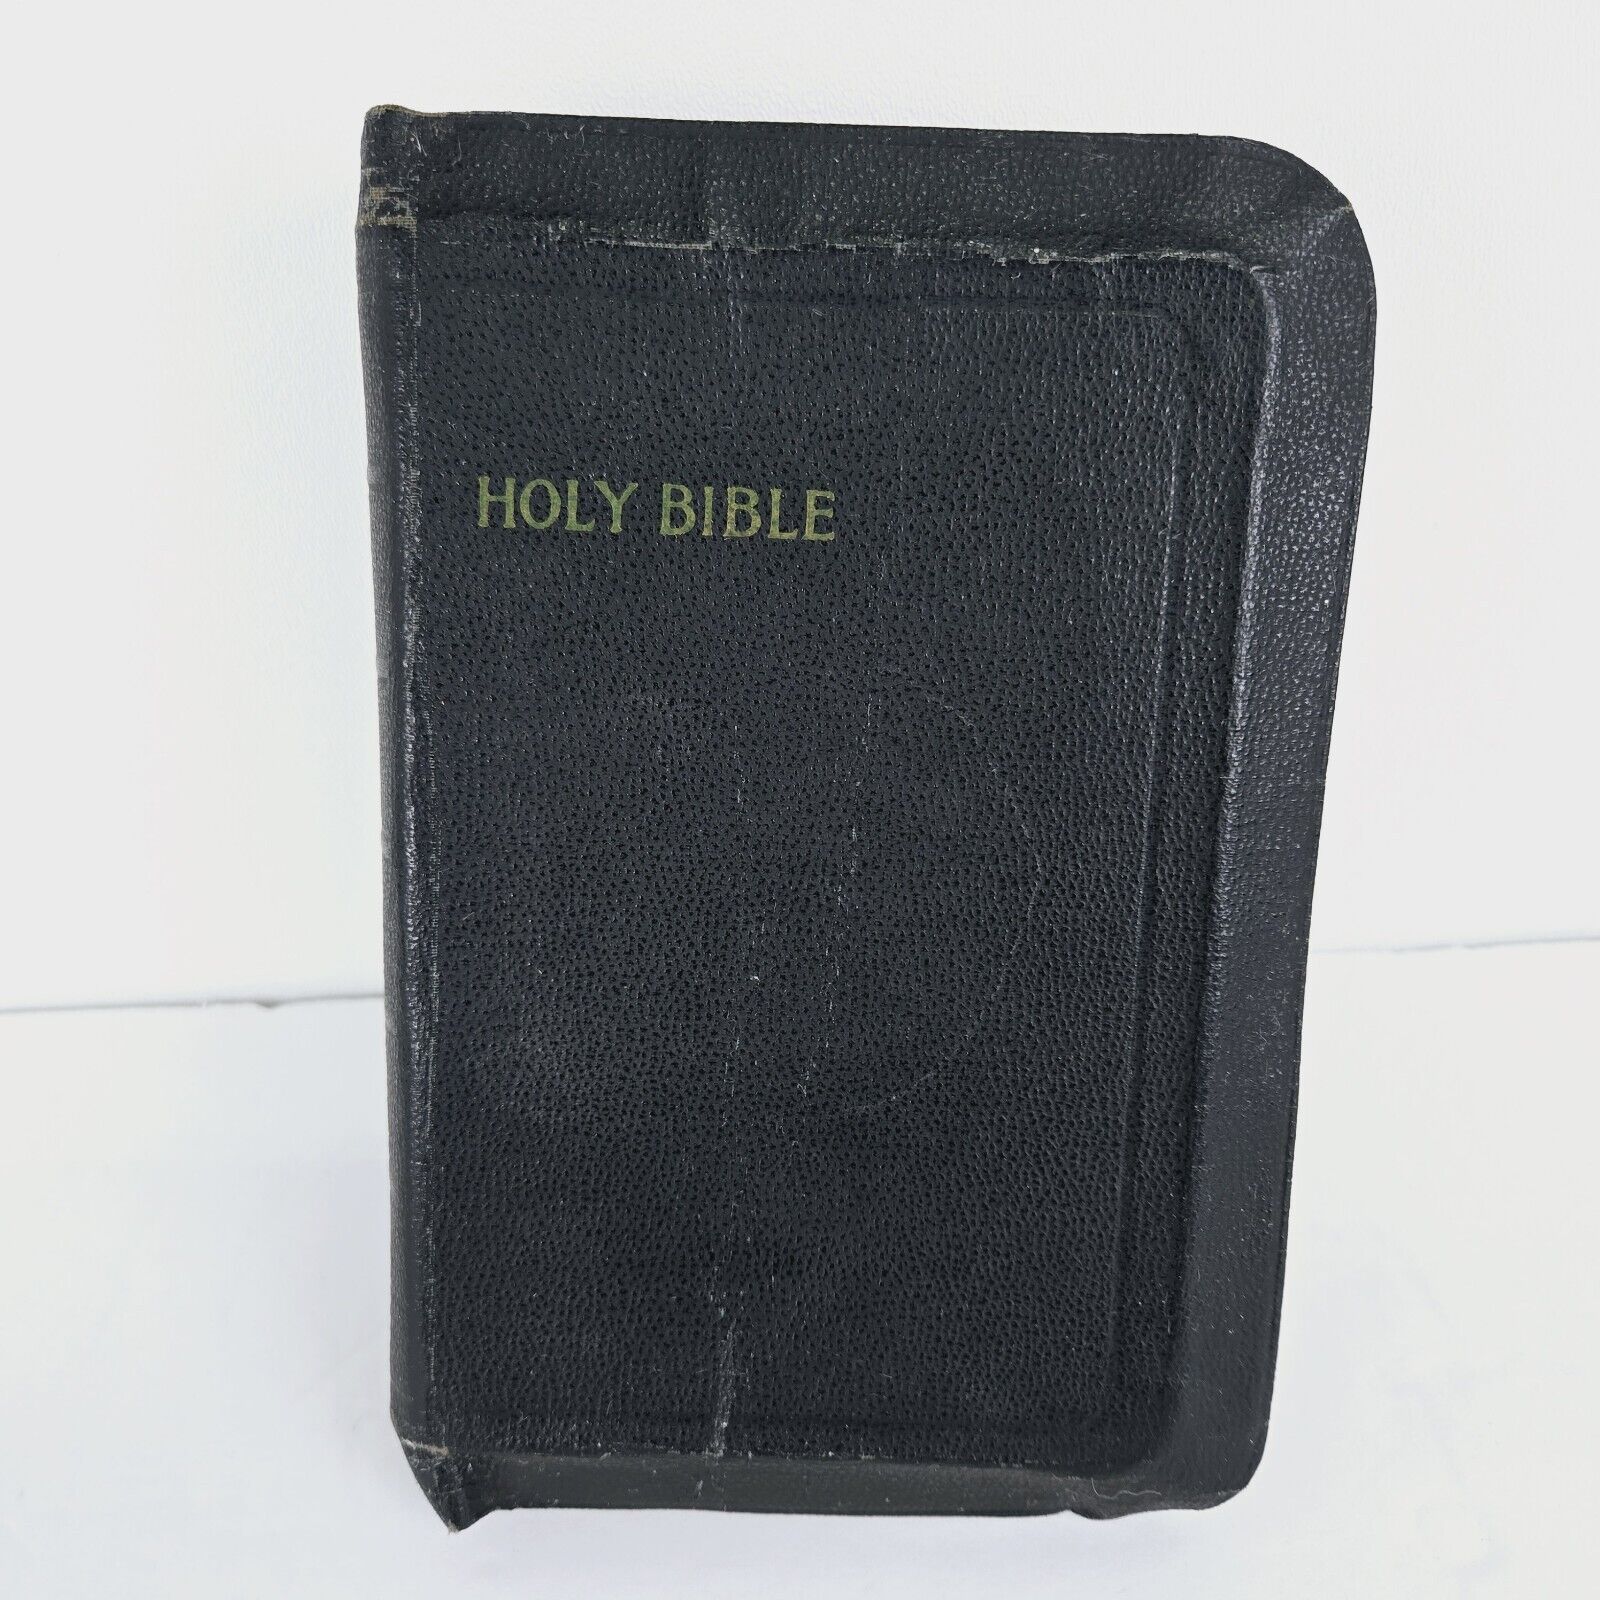 Vintage 1932 Holy Bible, Black Leather, T Nelson & Sons, Old & New Testiment, Ma